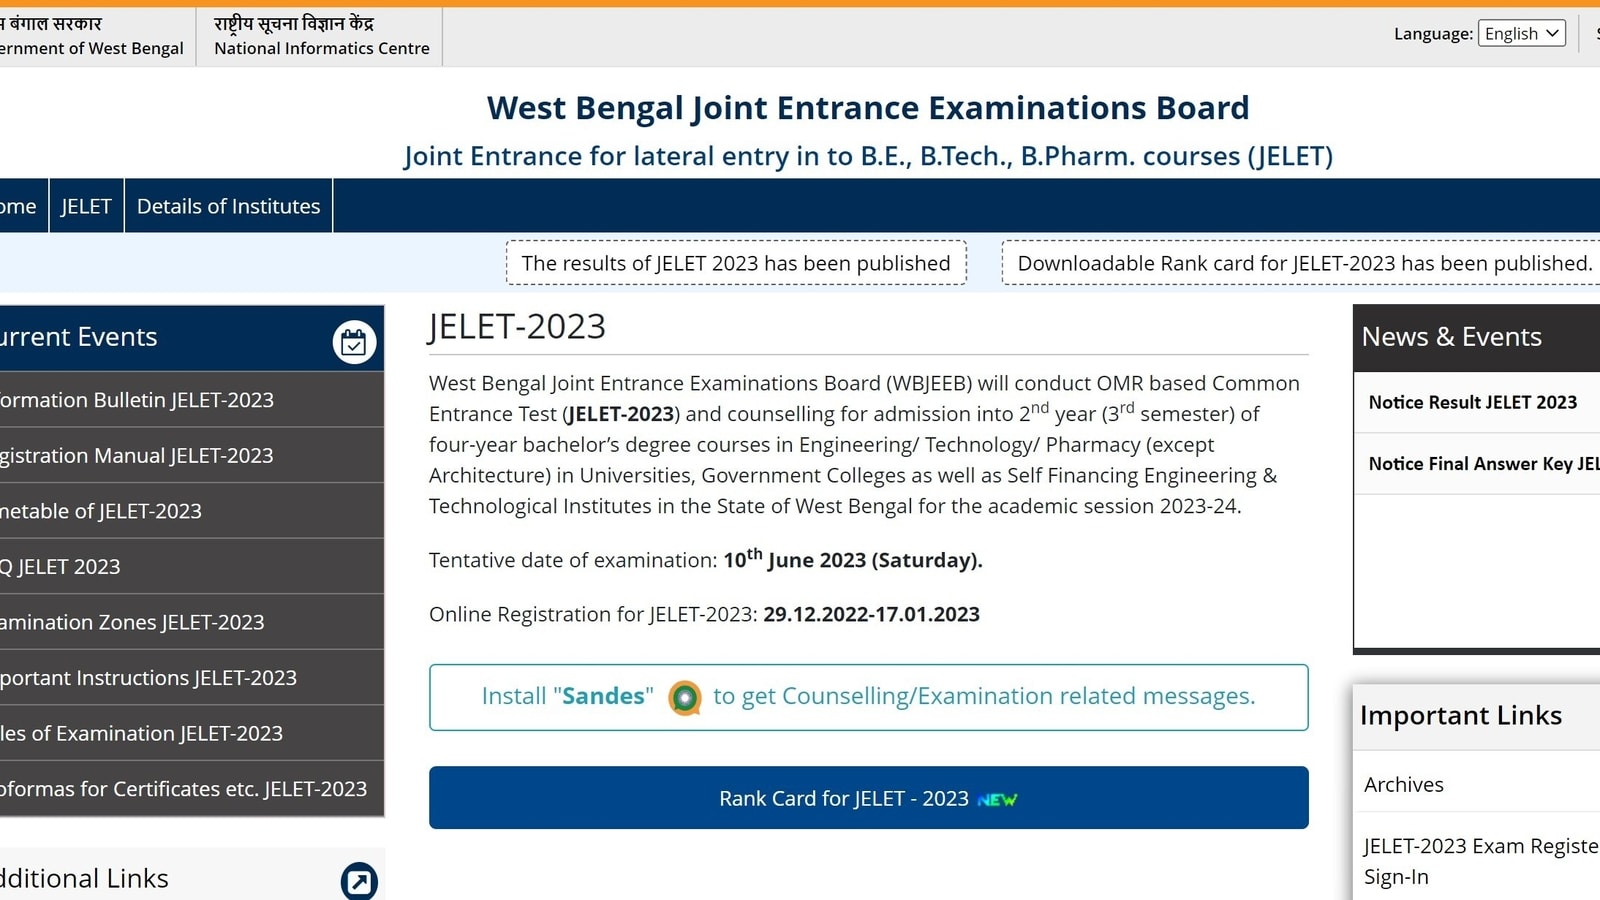 West Bengal JELET result 2023 declared at wbjeeb.nic.in, here's direct link